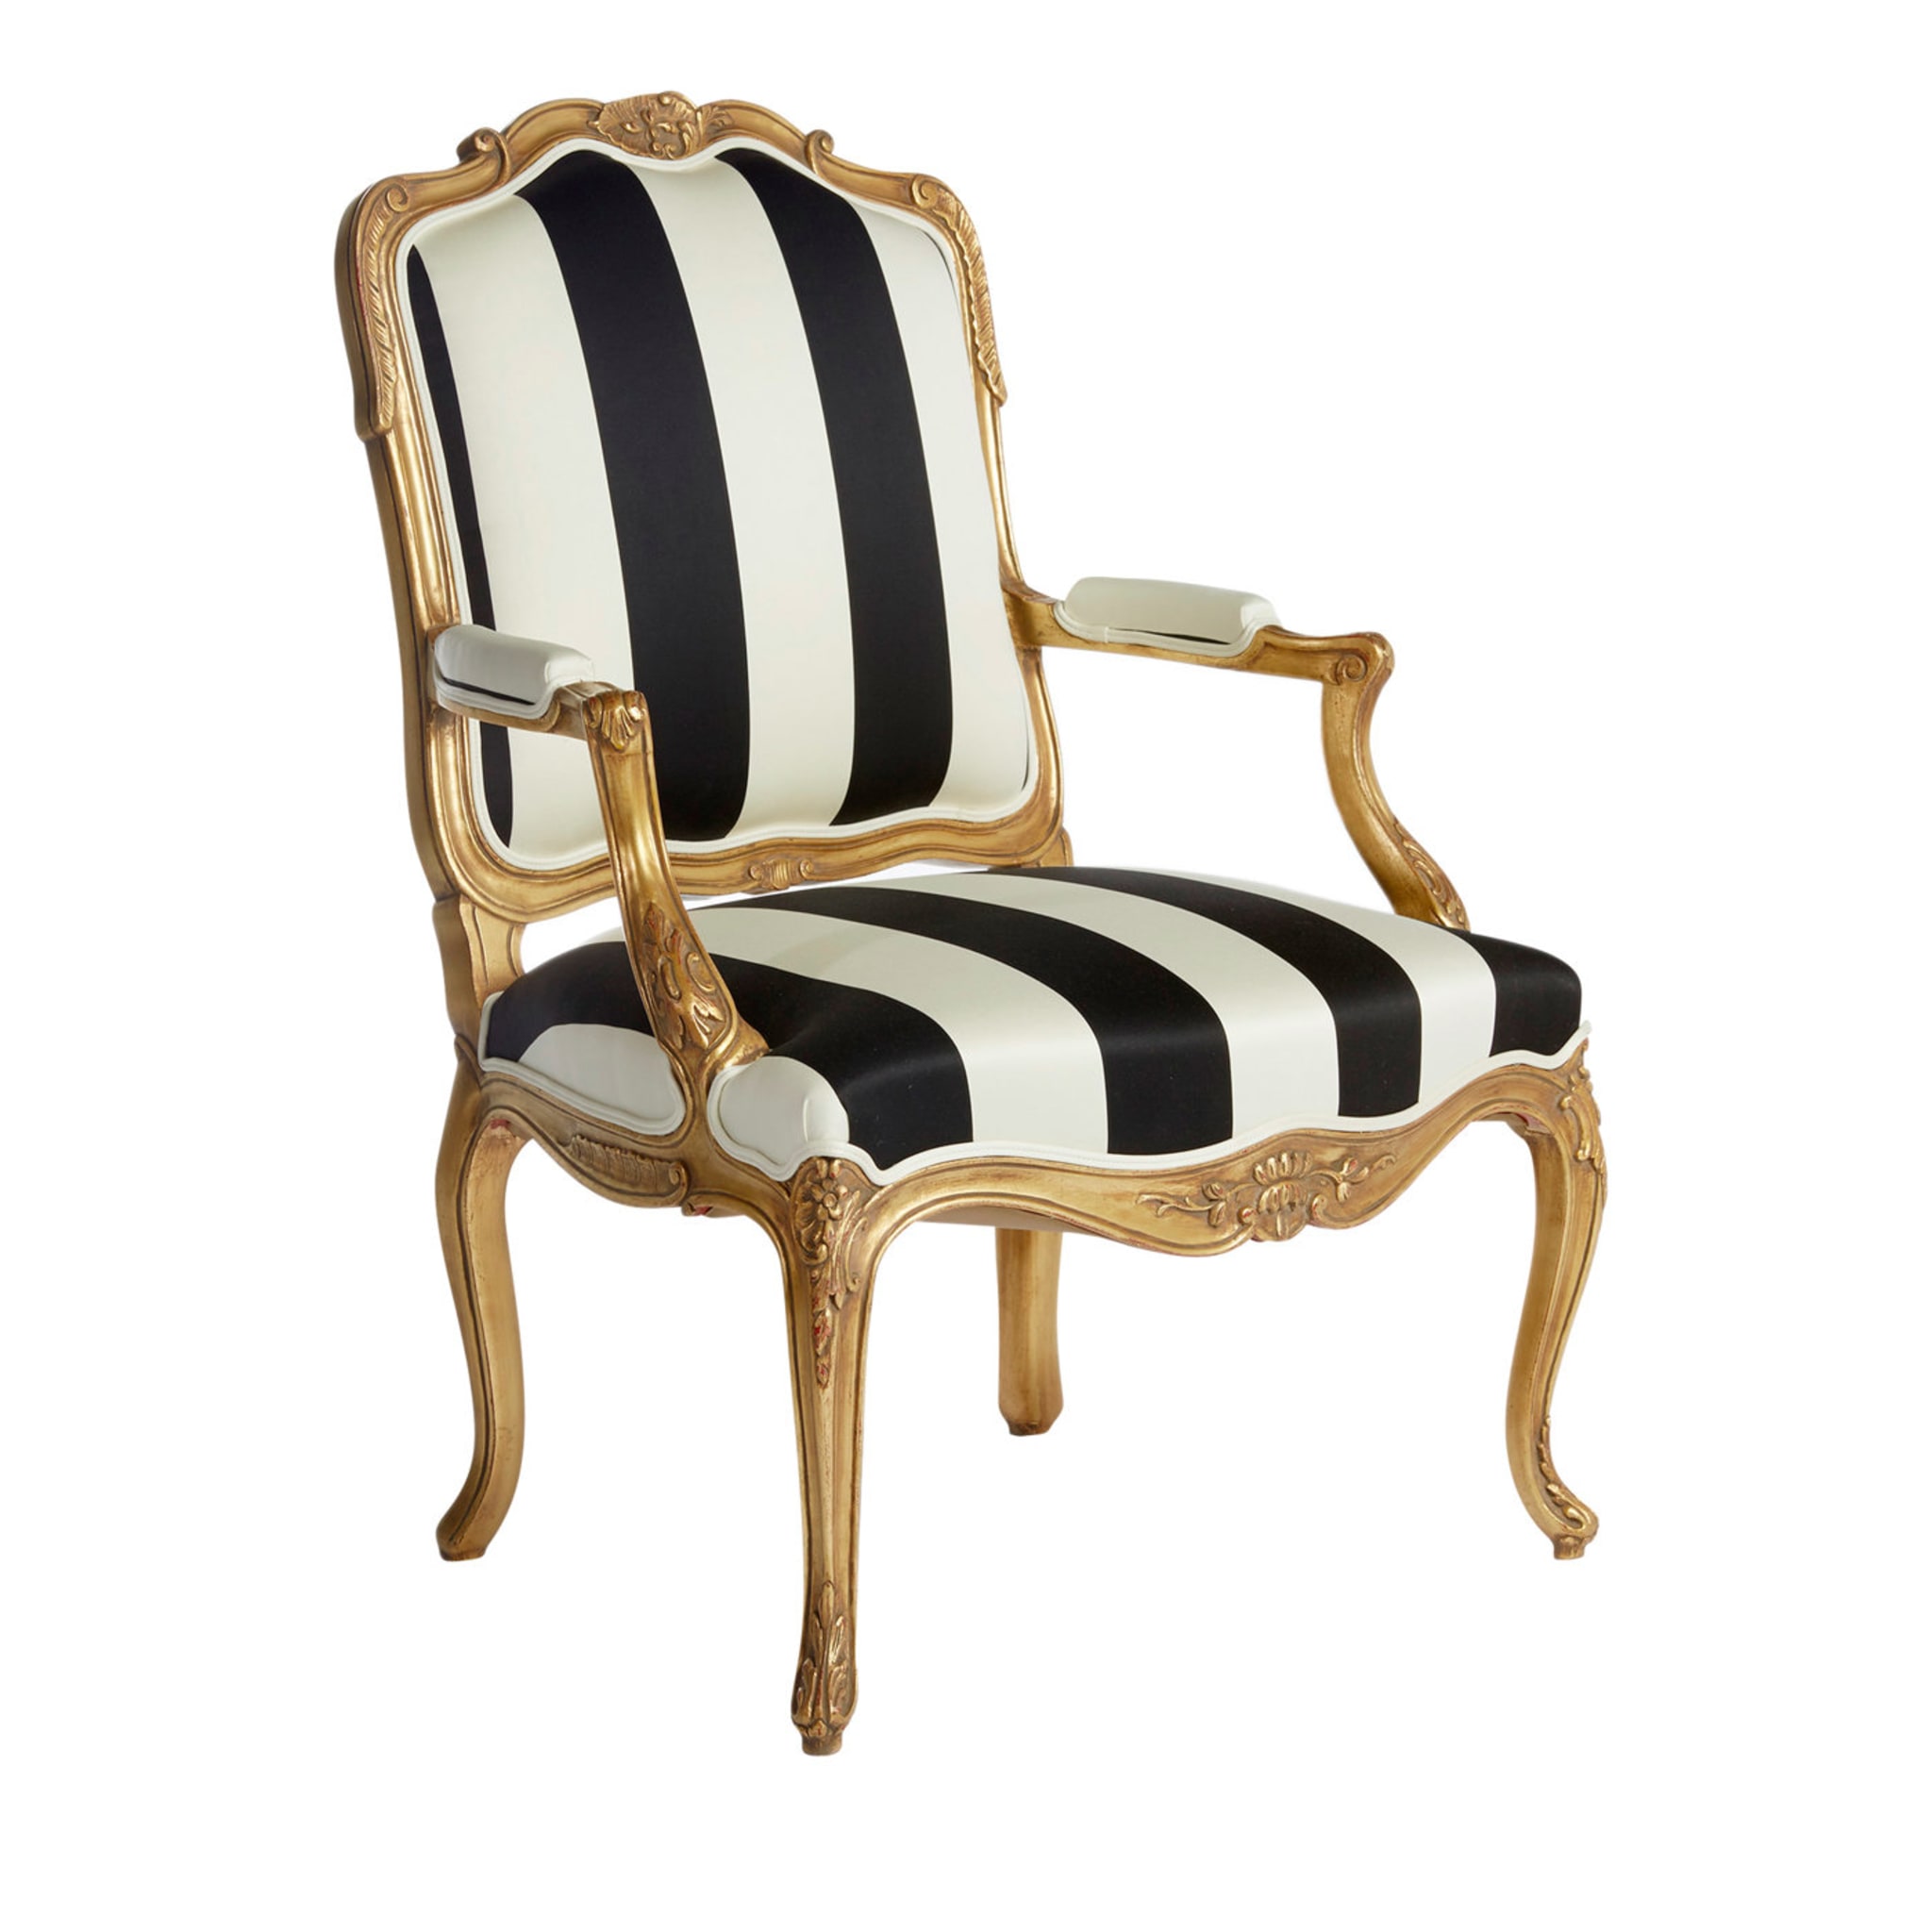 Black and White Chair With Armrests Louis XV - Main view